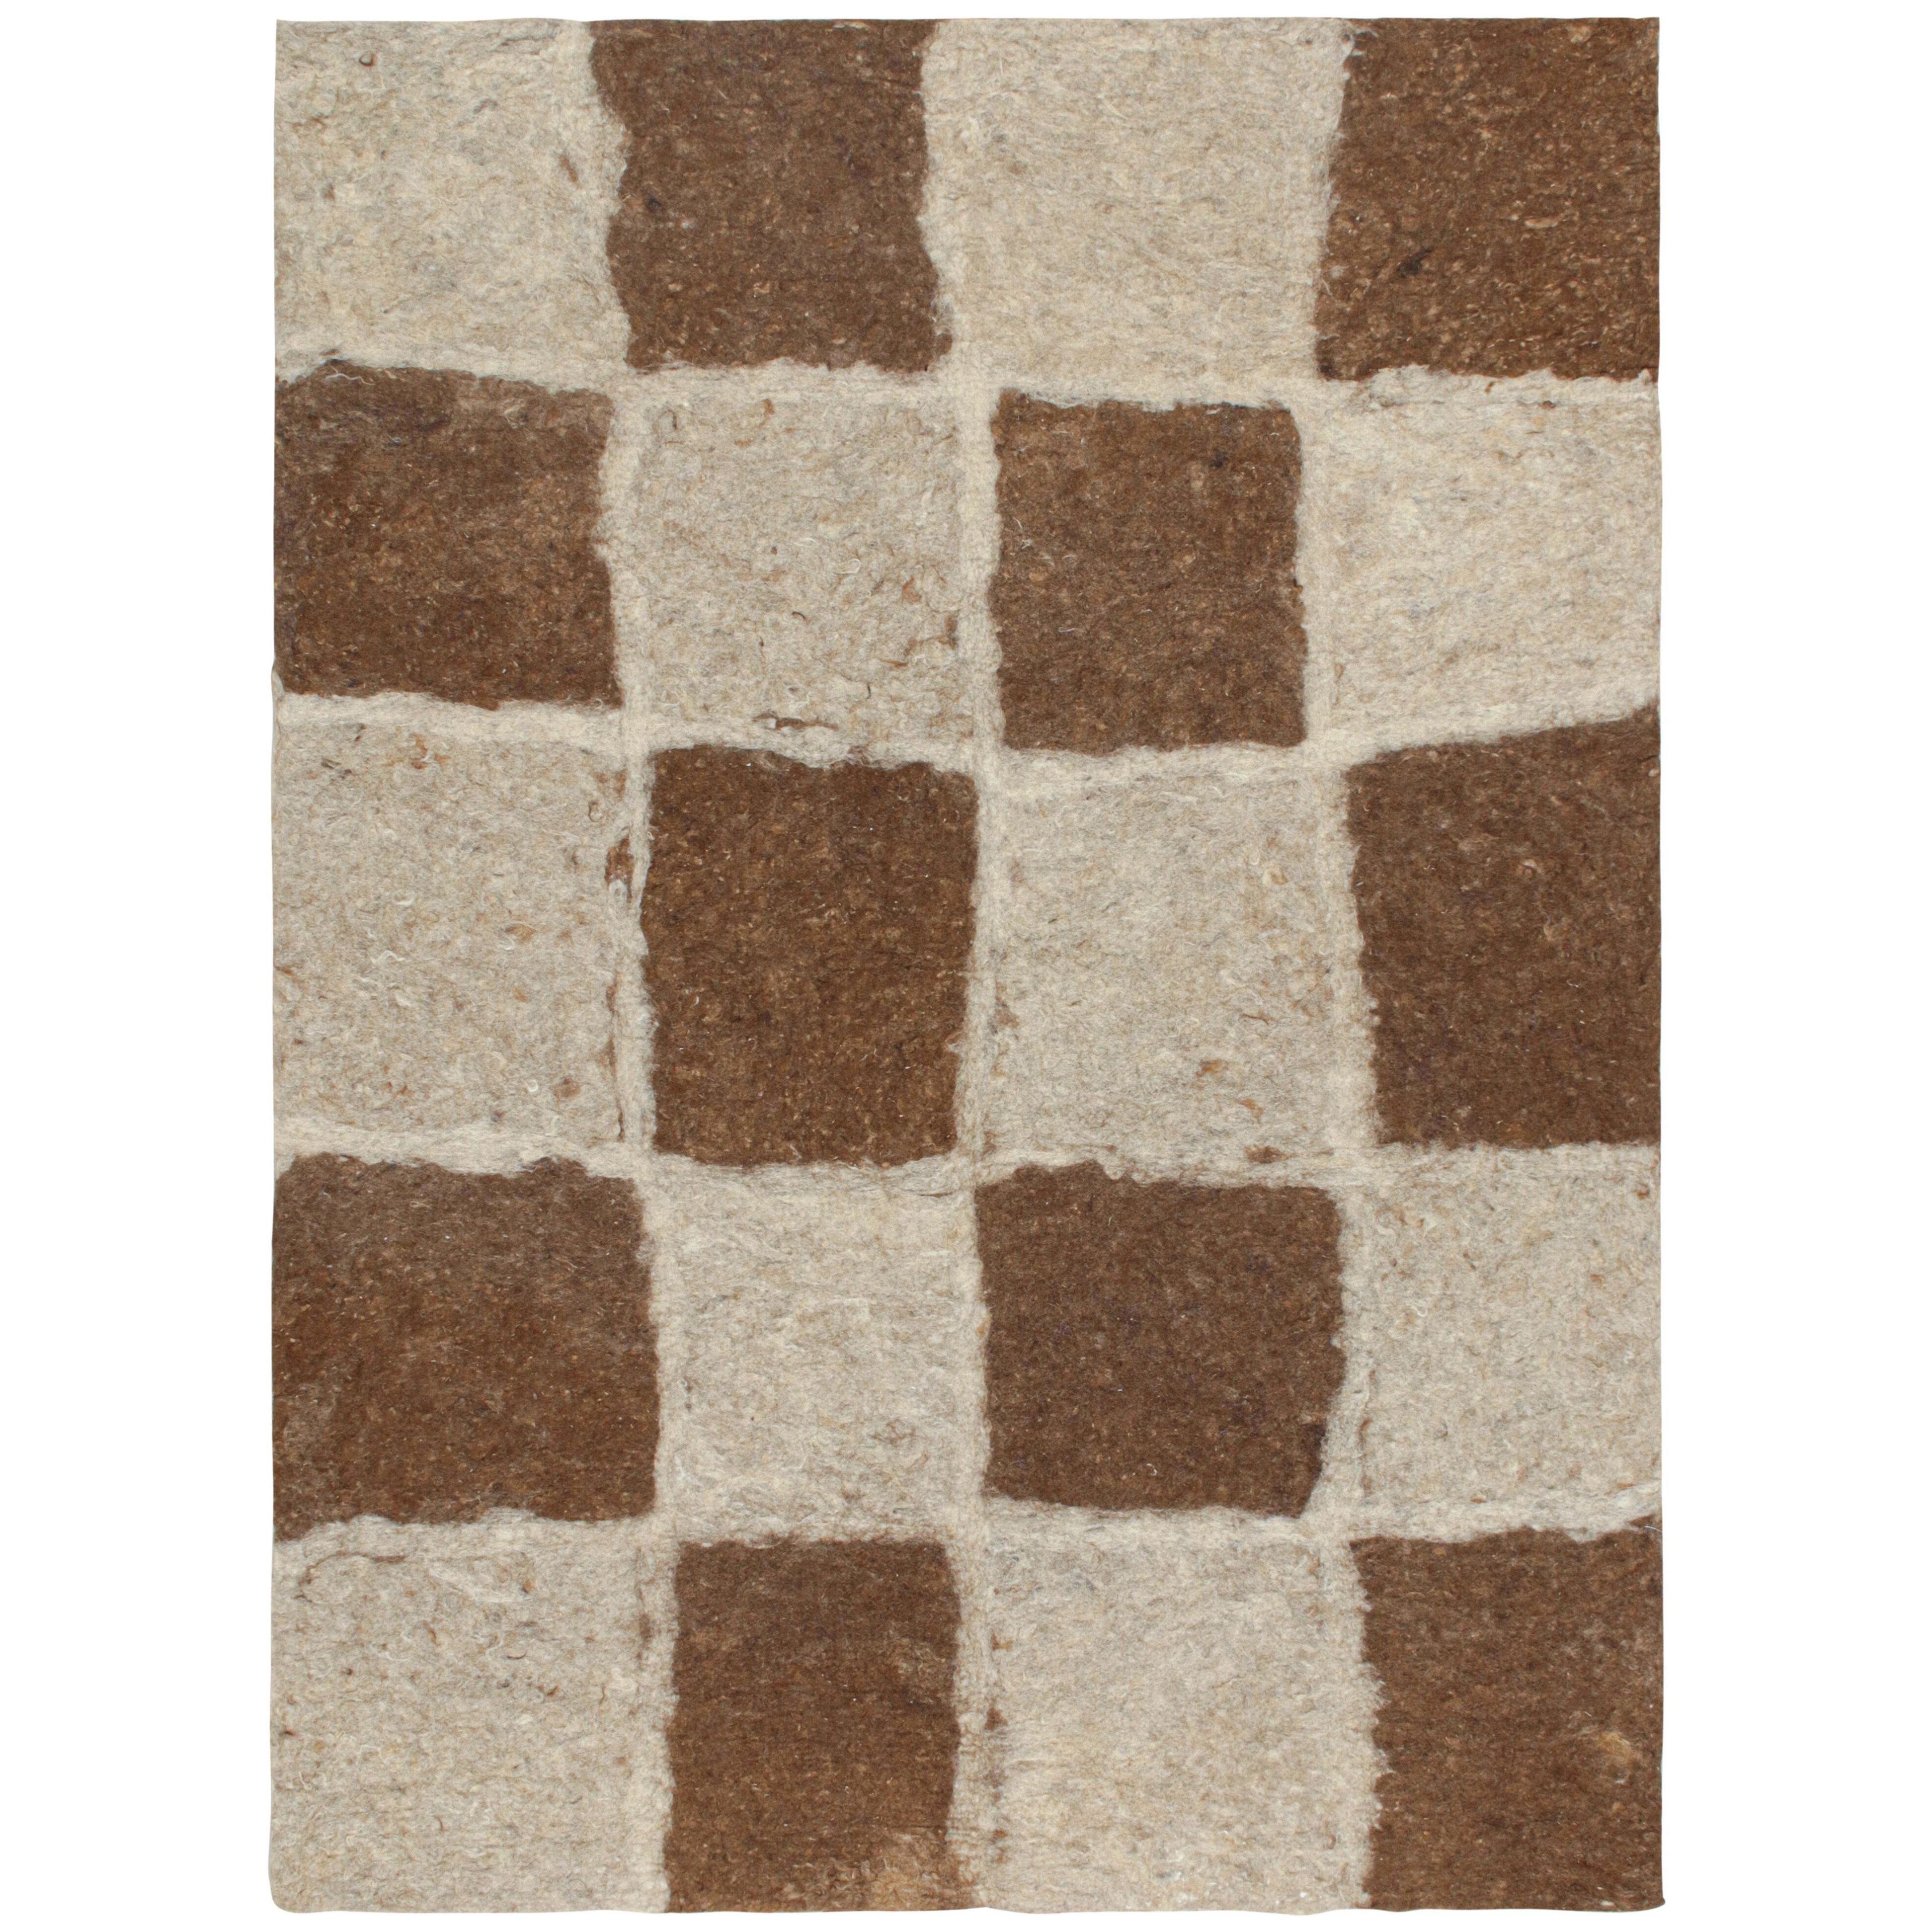 Rug & Kilim’s Contemporary Felted Persian Rug in Beige-Brown Geometric Pattern 